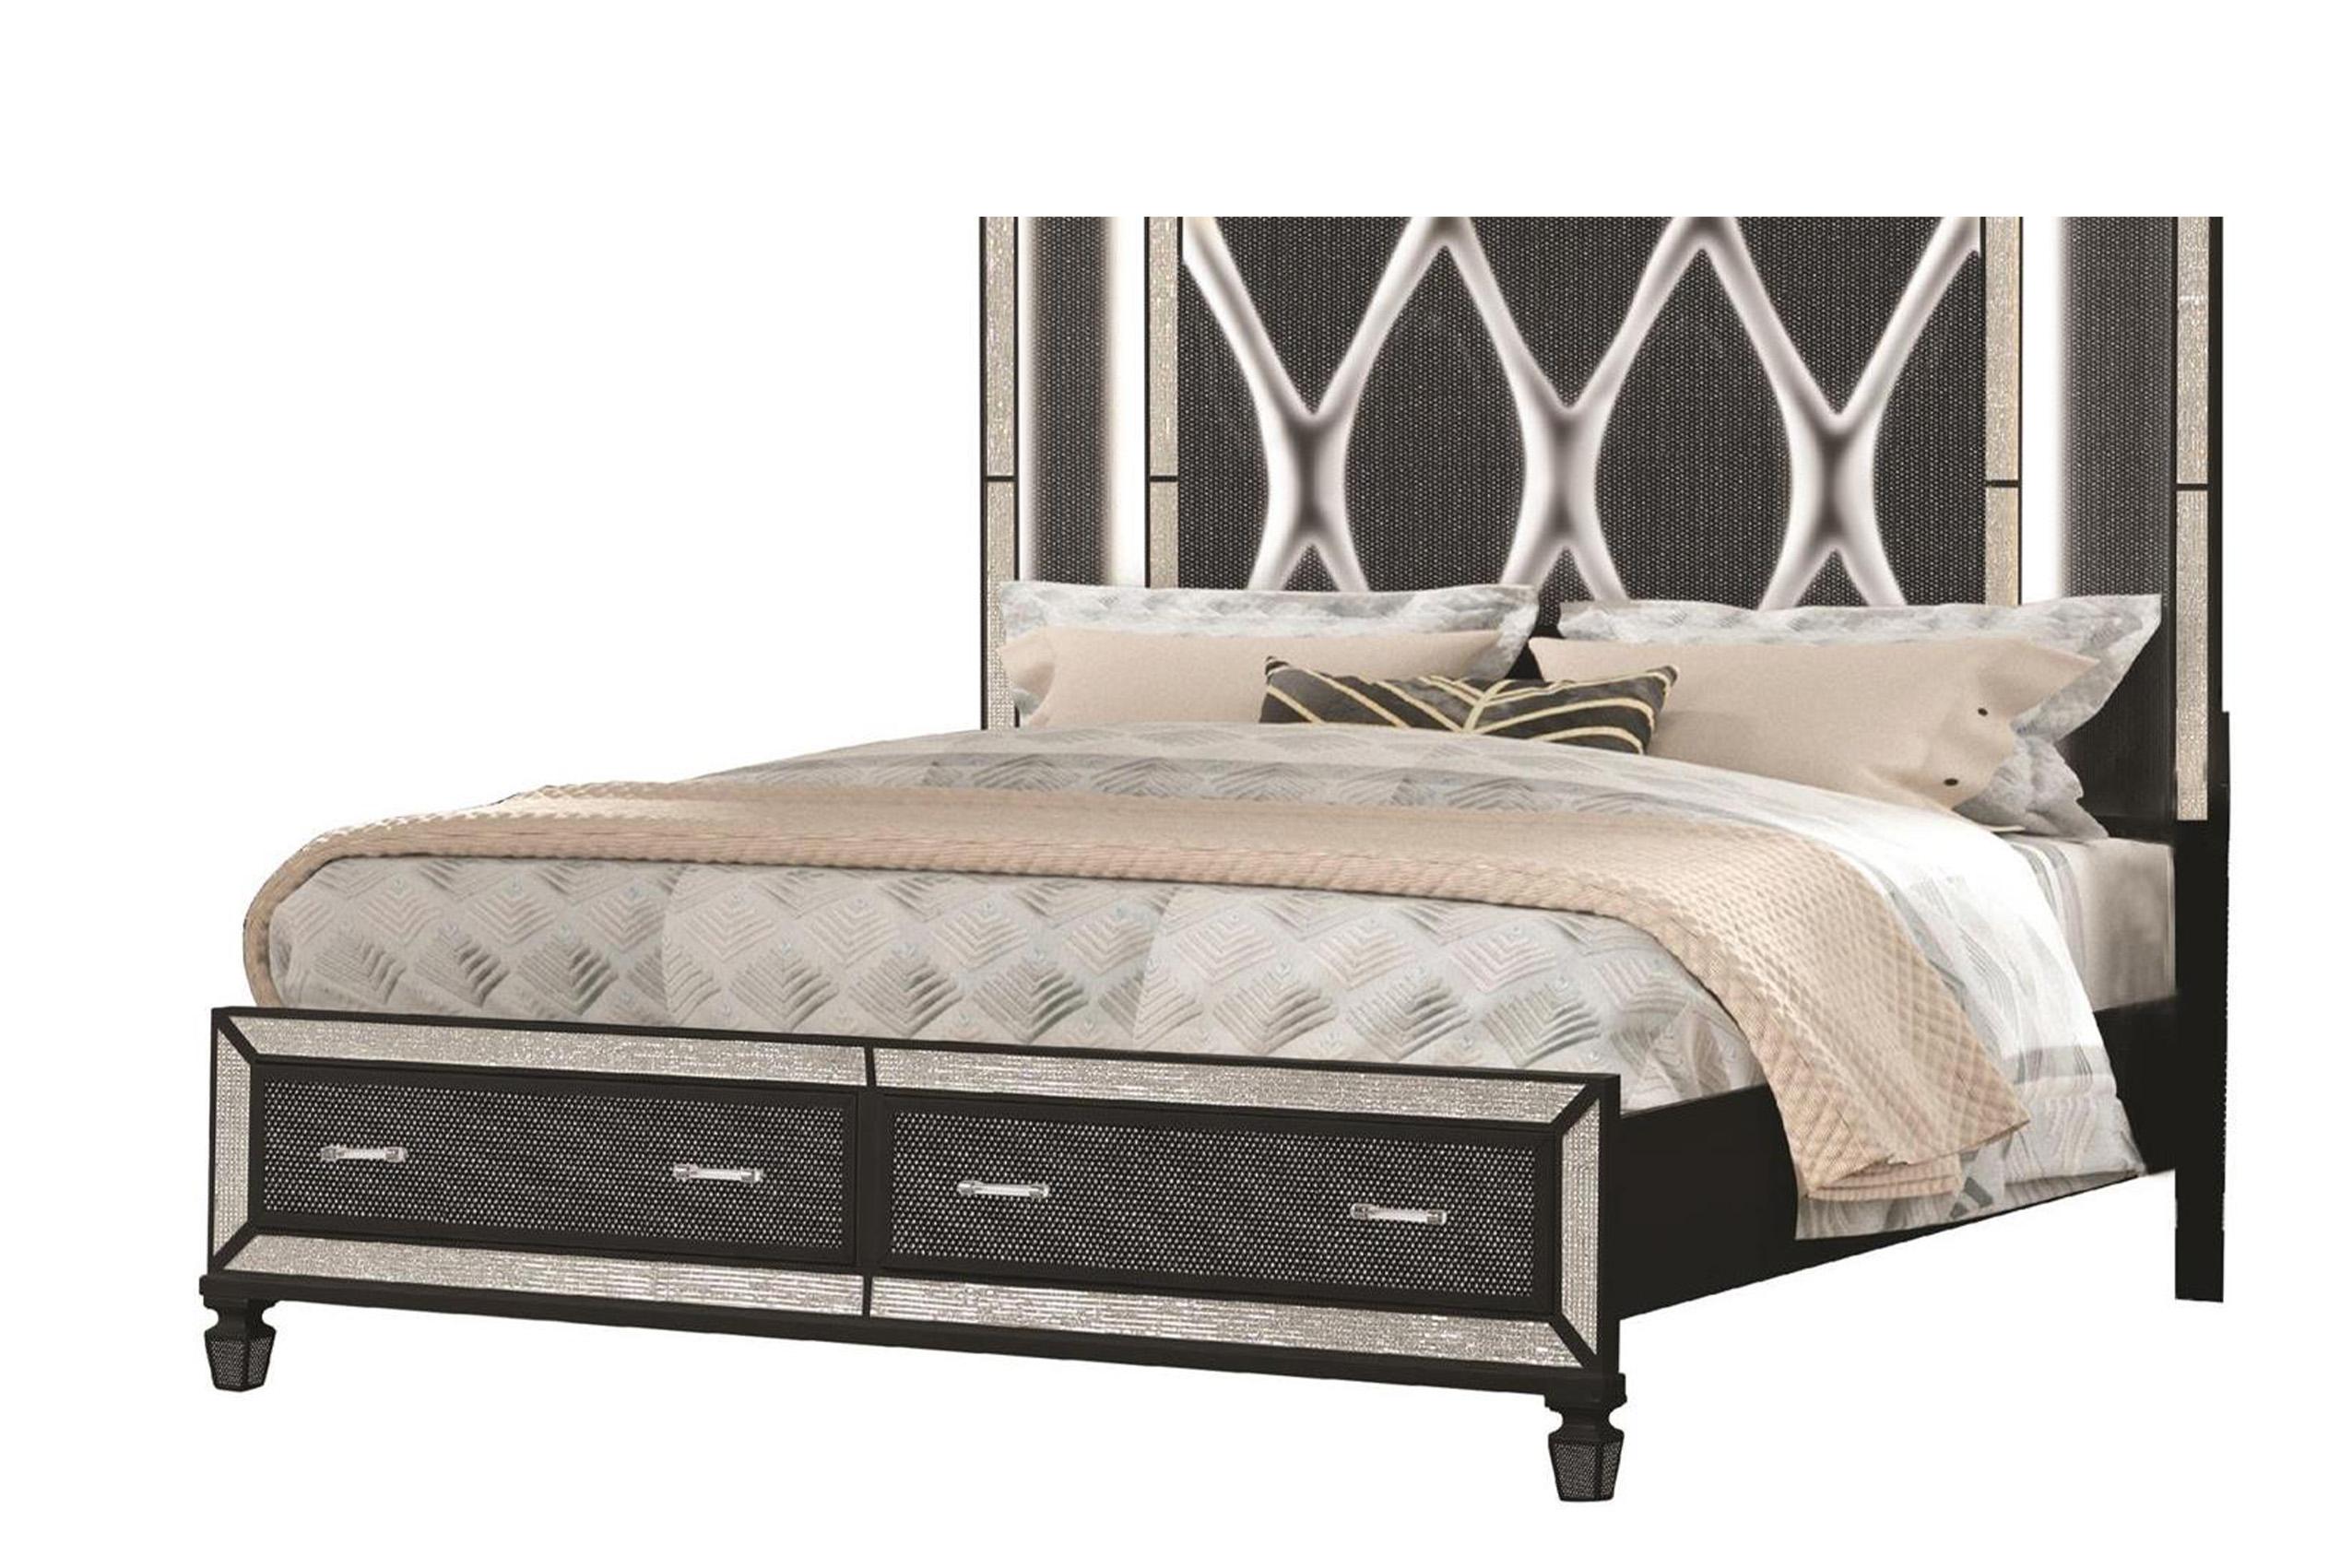 

    
Glam Black Solid Wood King Bed Set 4Pcs CRYSTAL Galaxy Home Modern Contemporary
